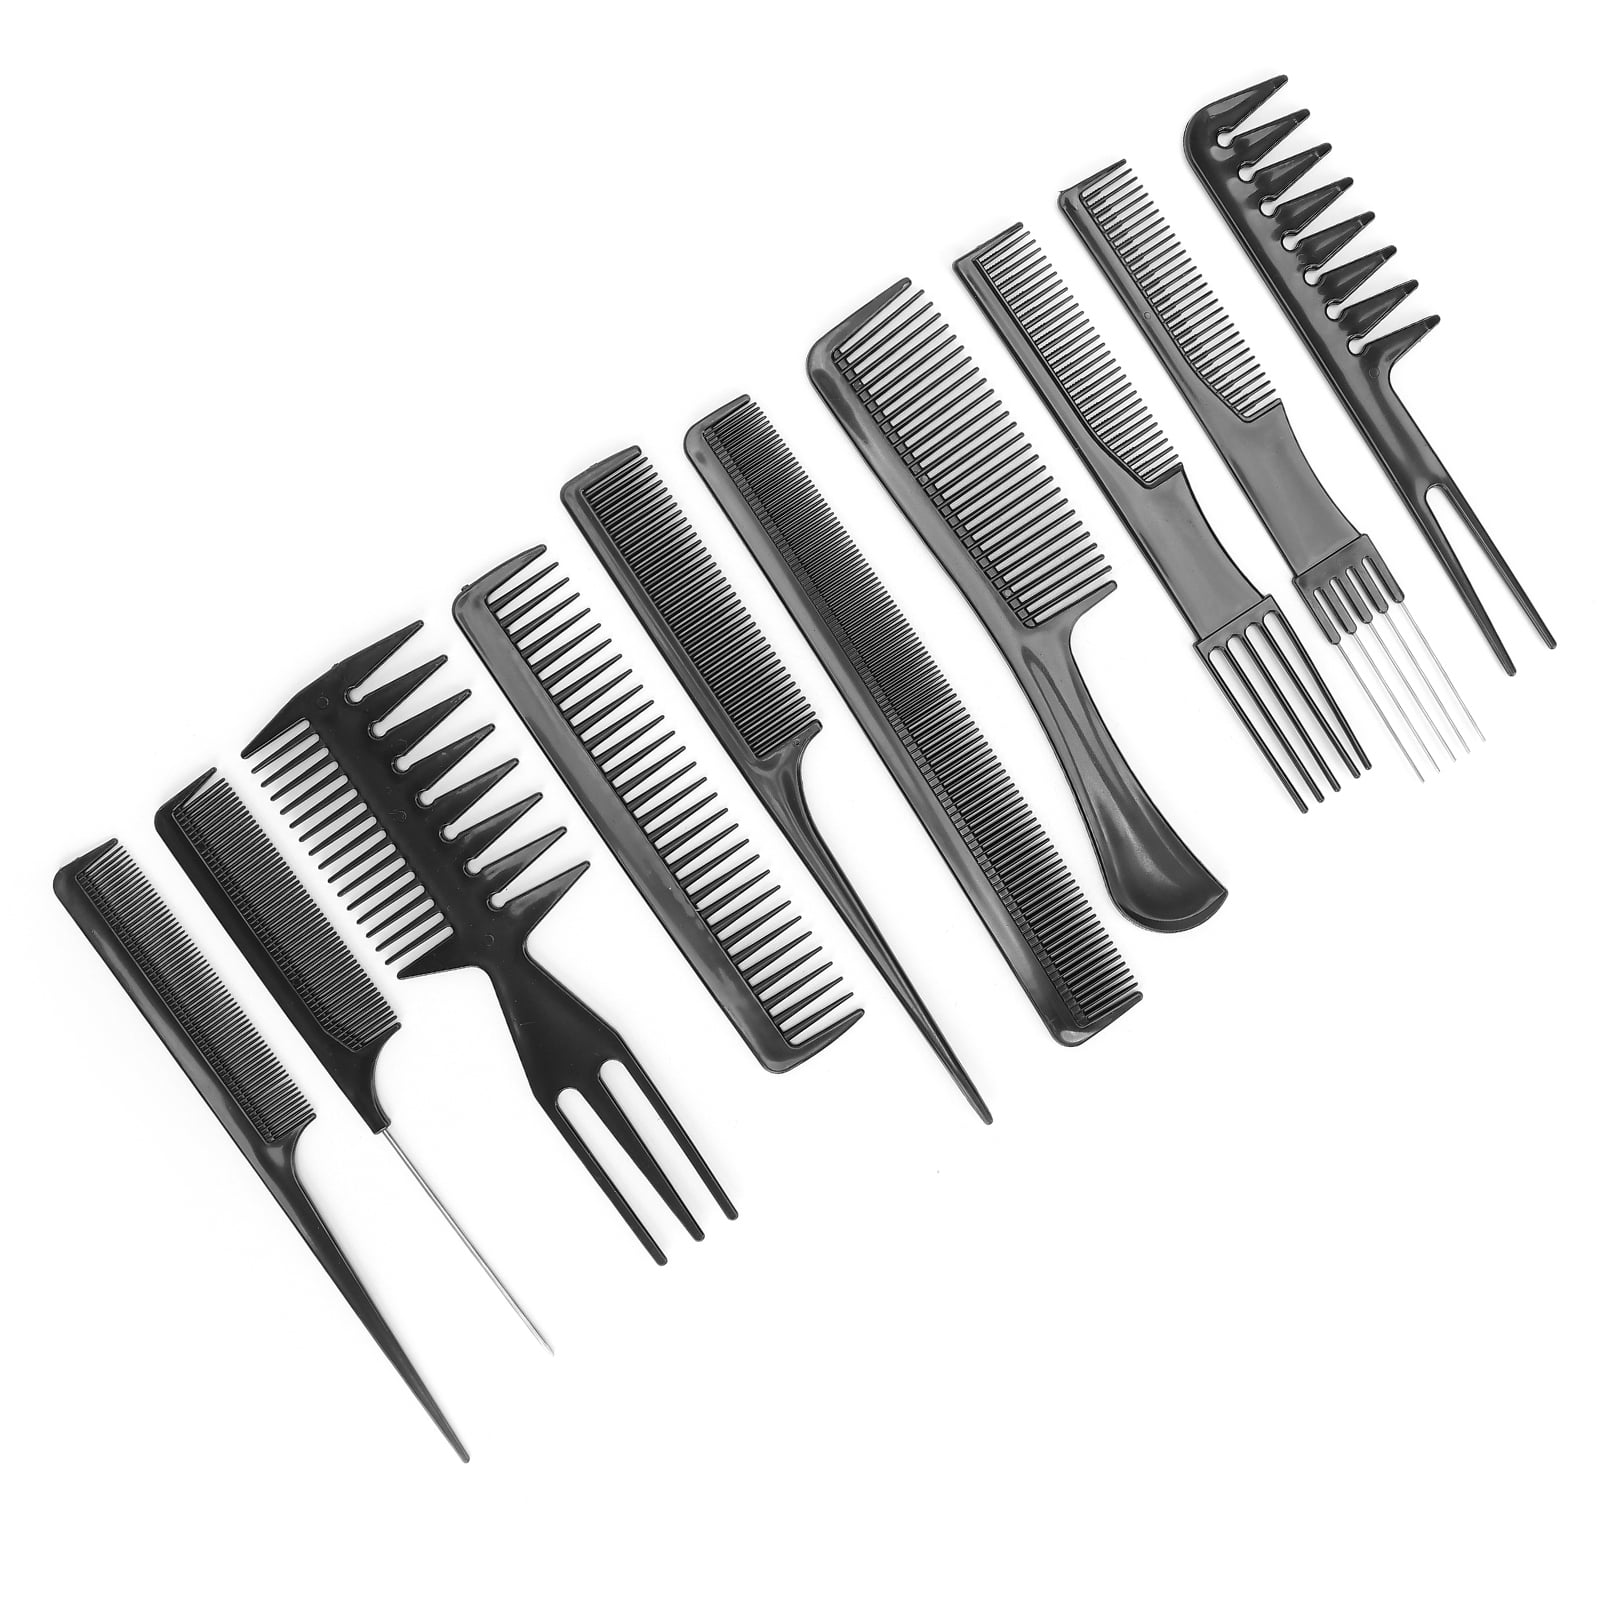 Hair Styling Comb Set, Hair Cutting Comb 10 Pieces Ergonomic Handle Design  Hairdressing Combs Set For Hair Salon And Barber Shop For All Hair Types  Styles | Walmart Canada